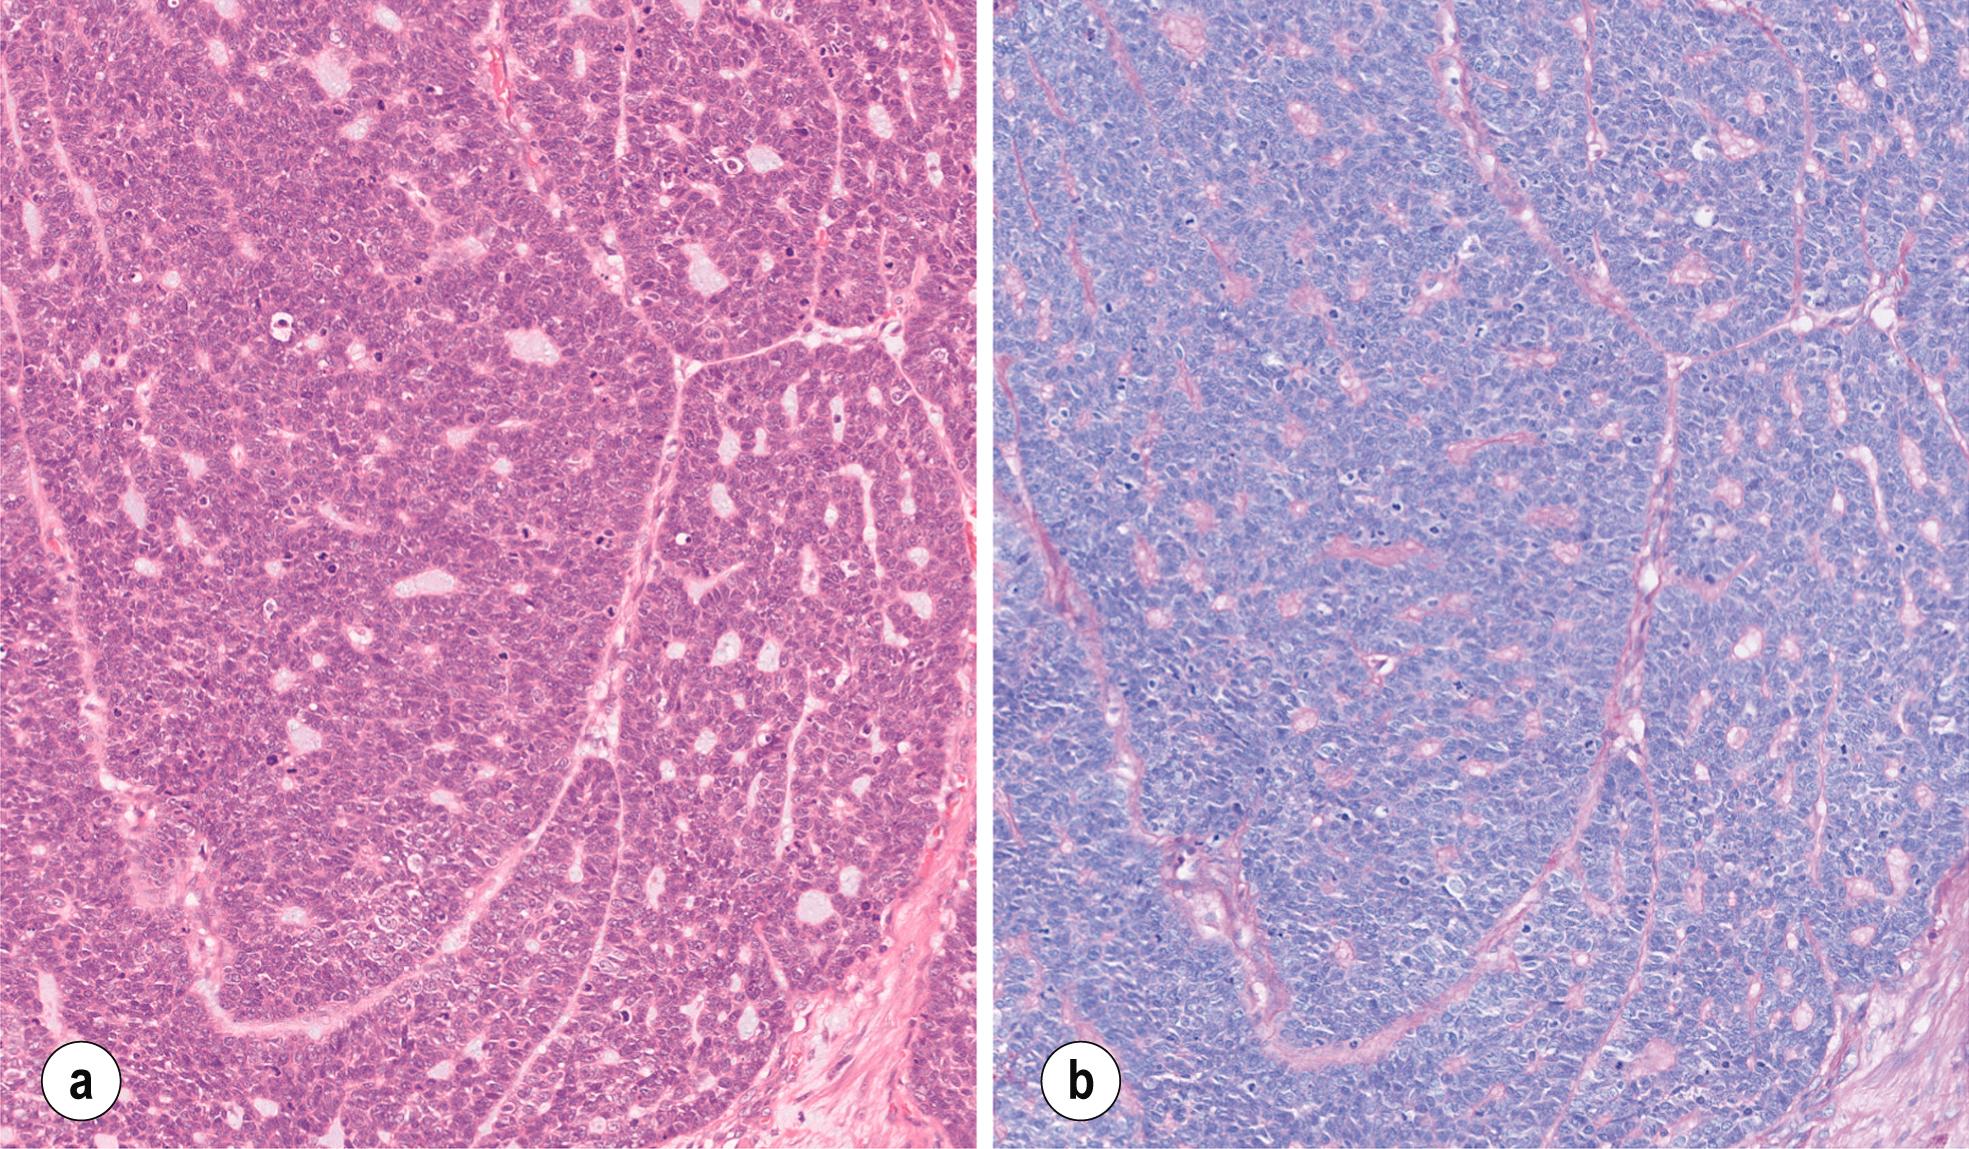 Fig. 1.5, Histology of basaloid squamous cell carcinoma. (a) Haematoxylin/eosin-stained section showing a tumour with a solid growth pattern and small gland-like structures. (b) PAS stained section of the same tumour showing light pink coloured material in the gland-like lumen.